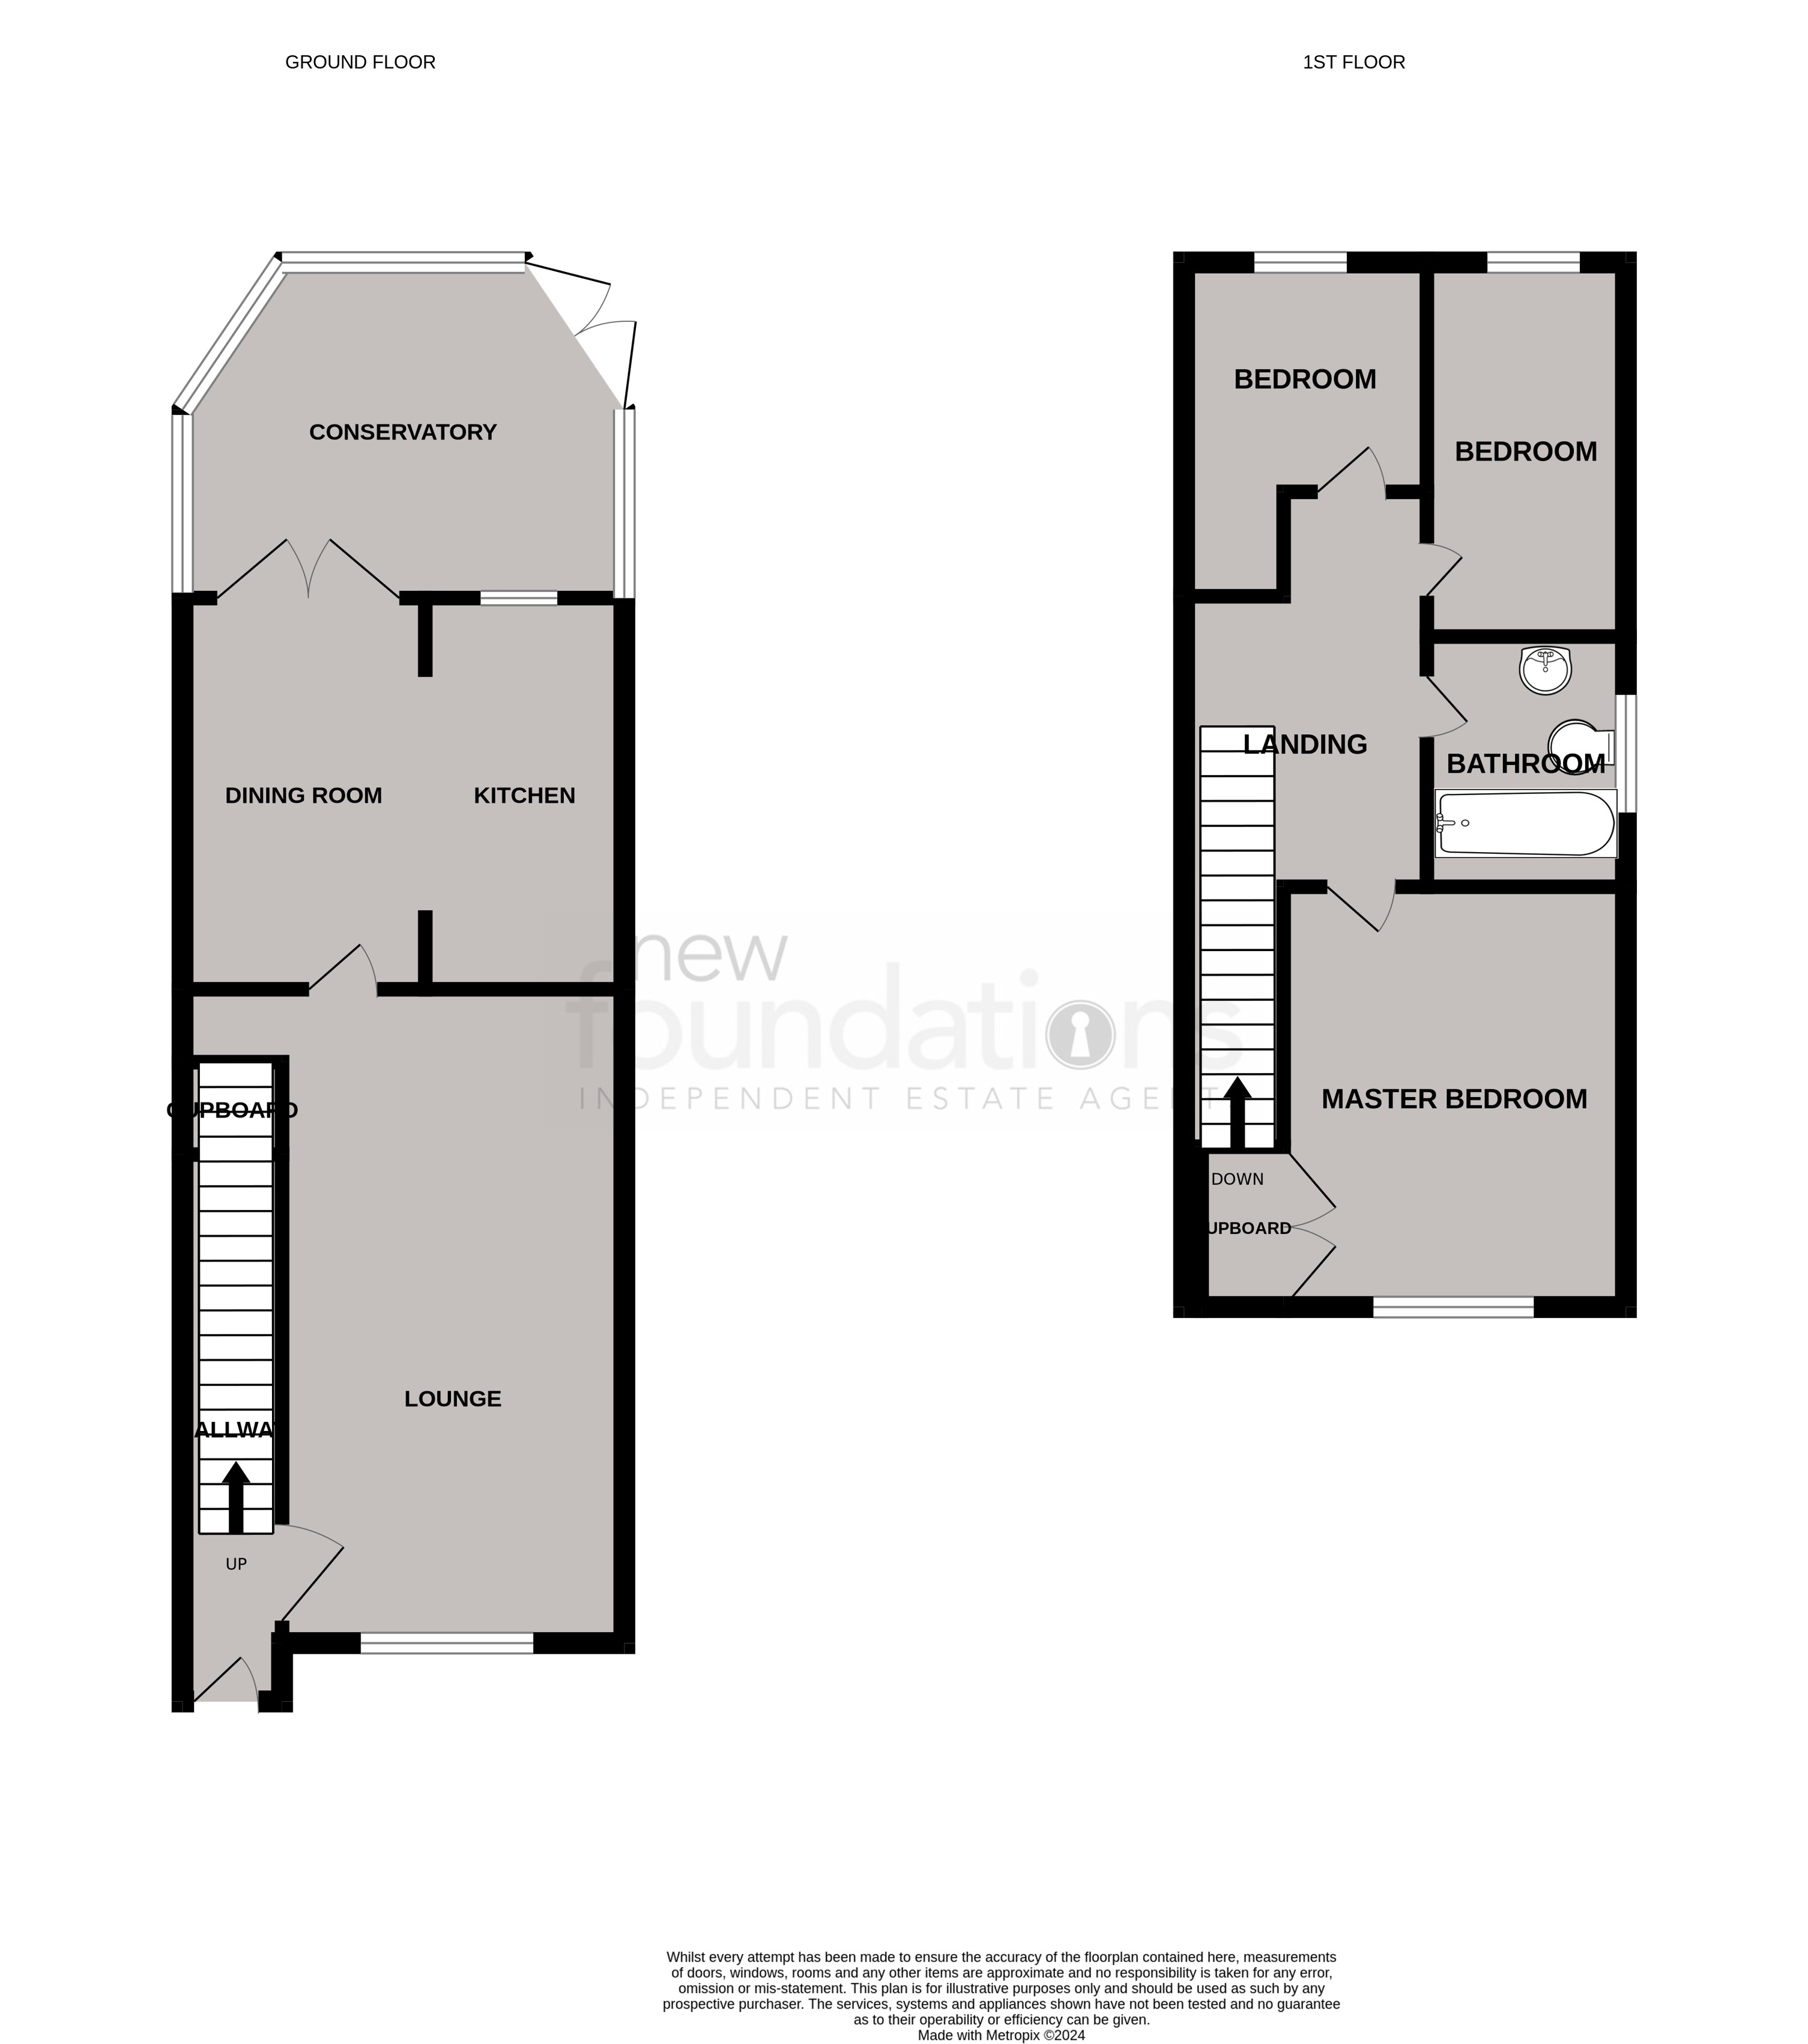 Floorplans For Ashdown Road, Bexhill-on-Sea, East Sussex